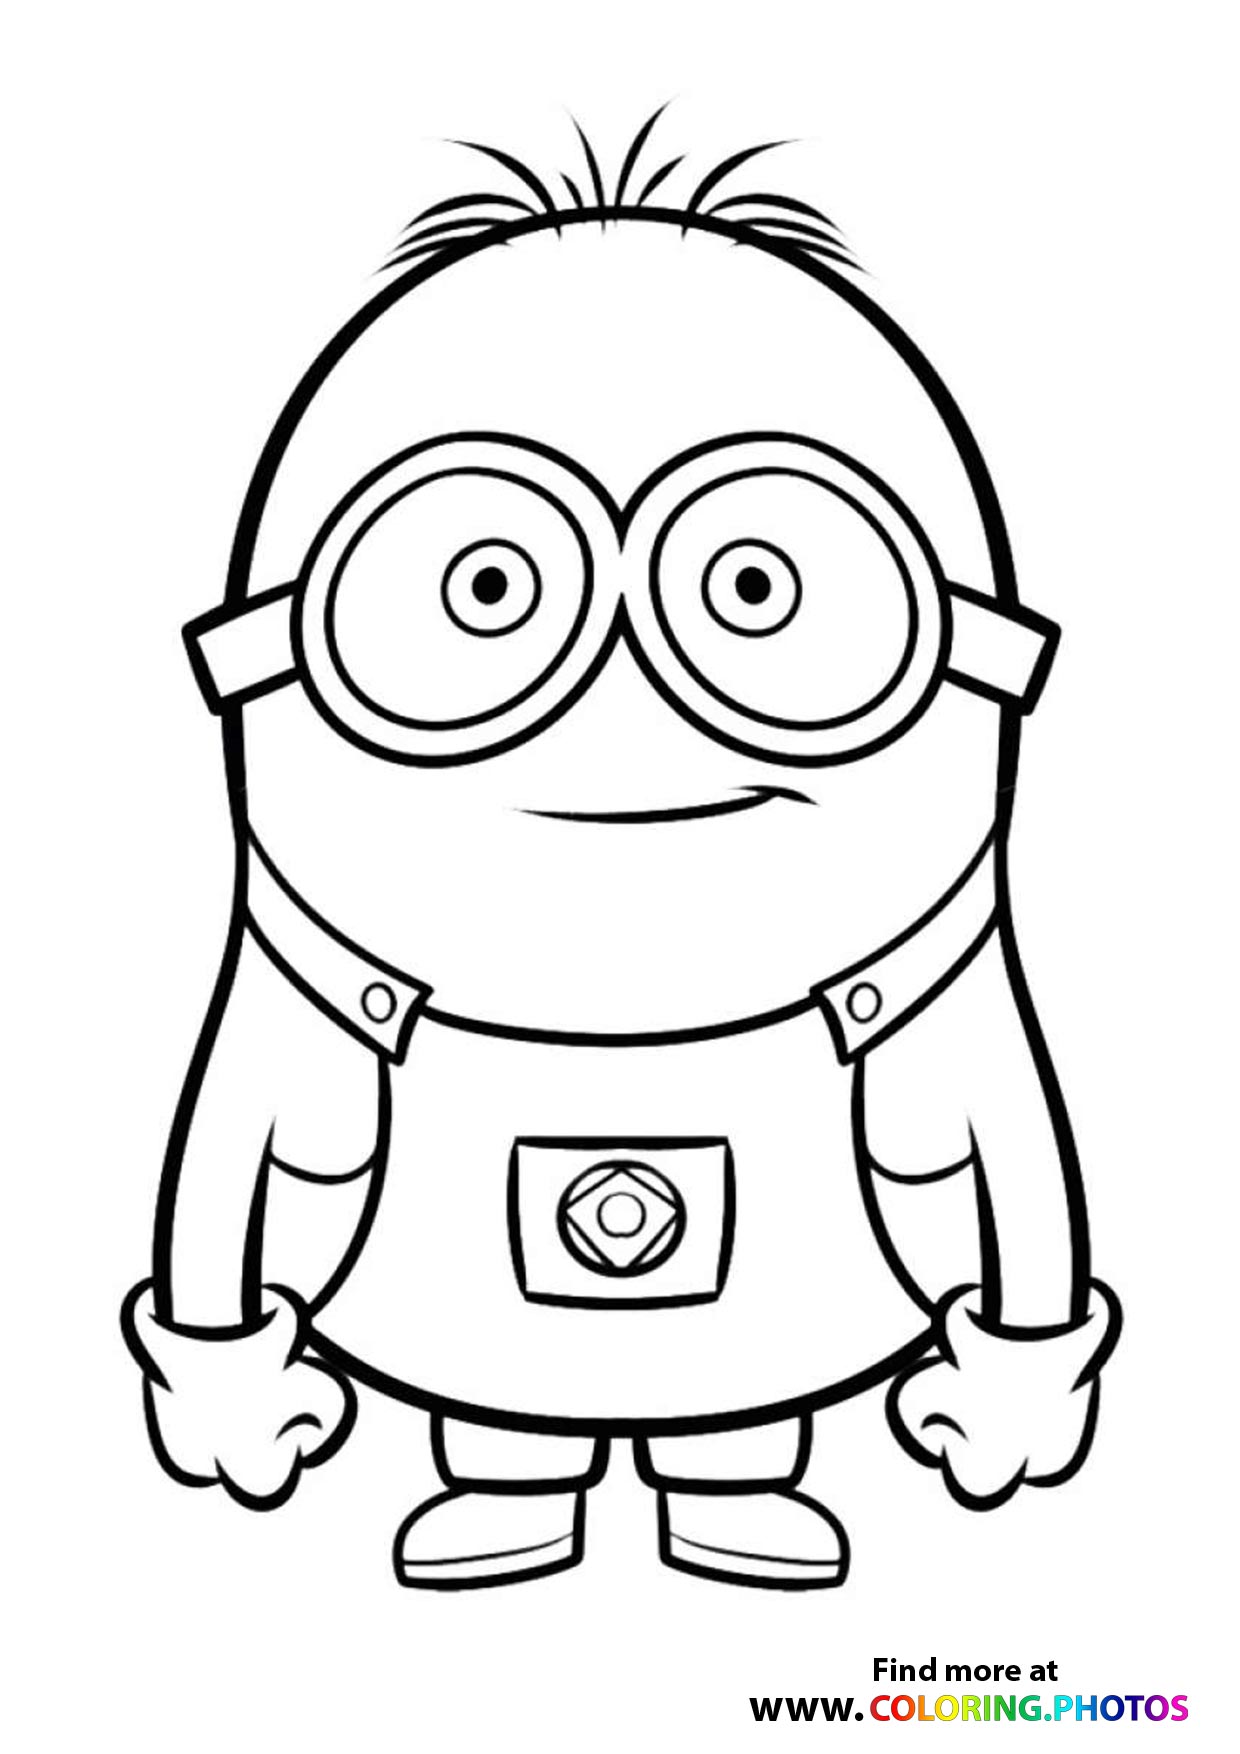 Minions   Coloring Pages for kids   Free and easy print or download